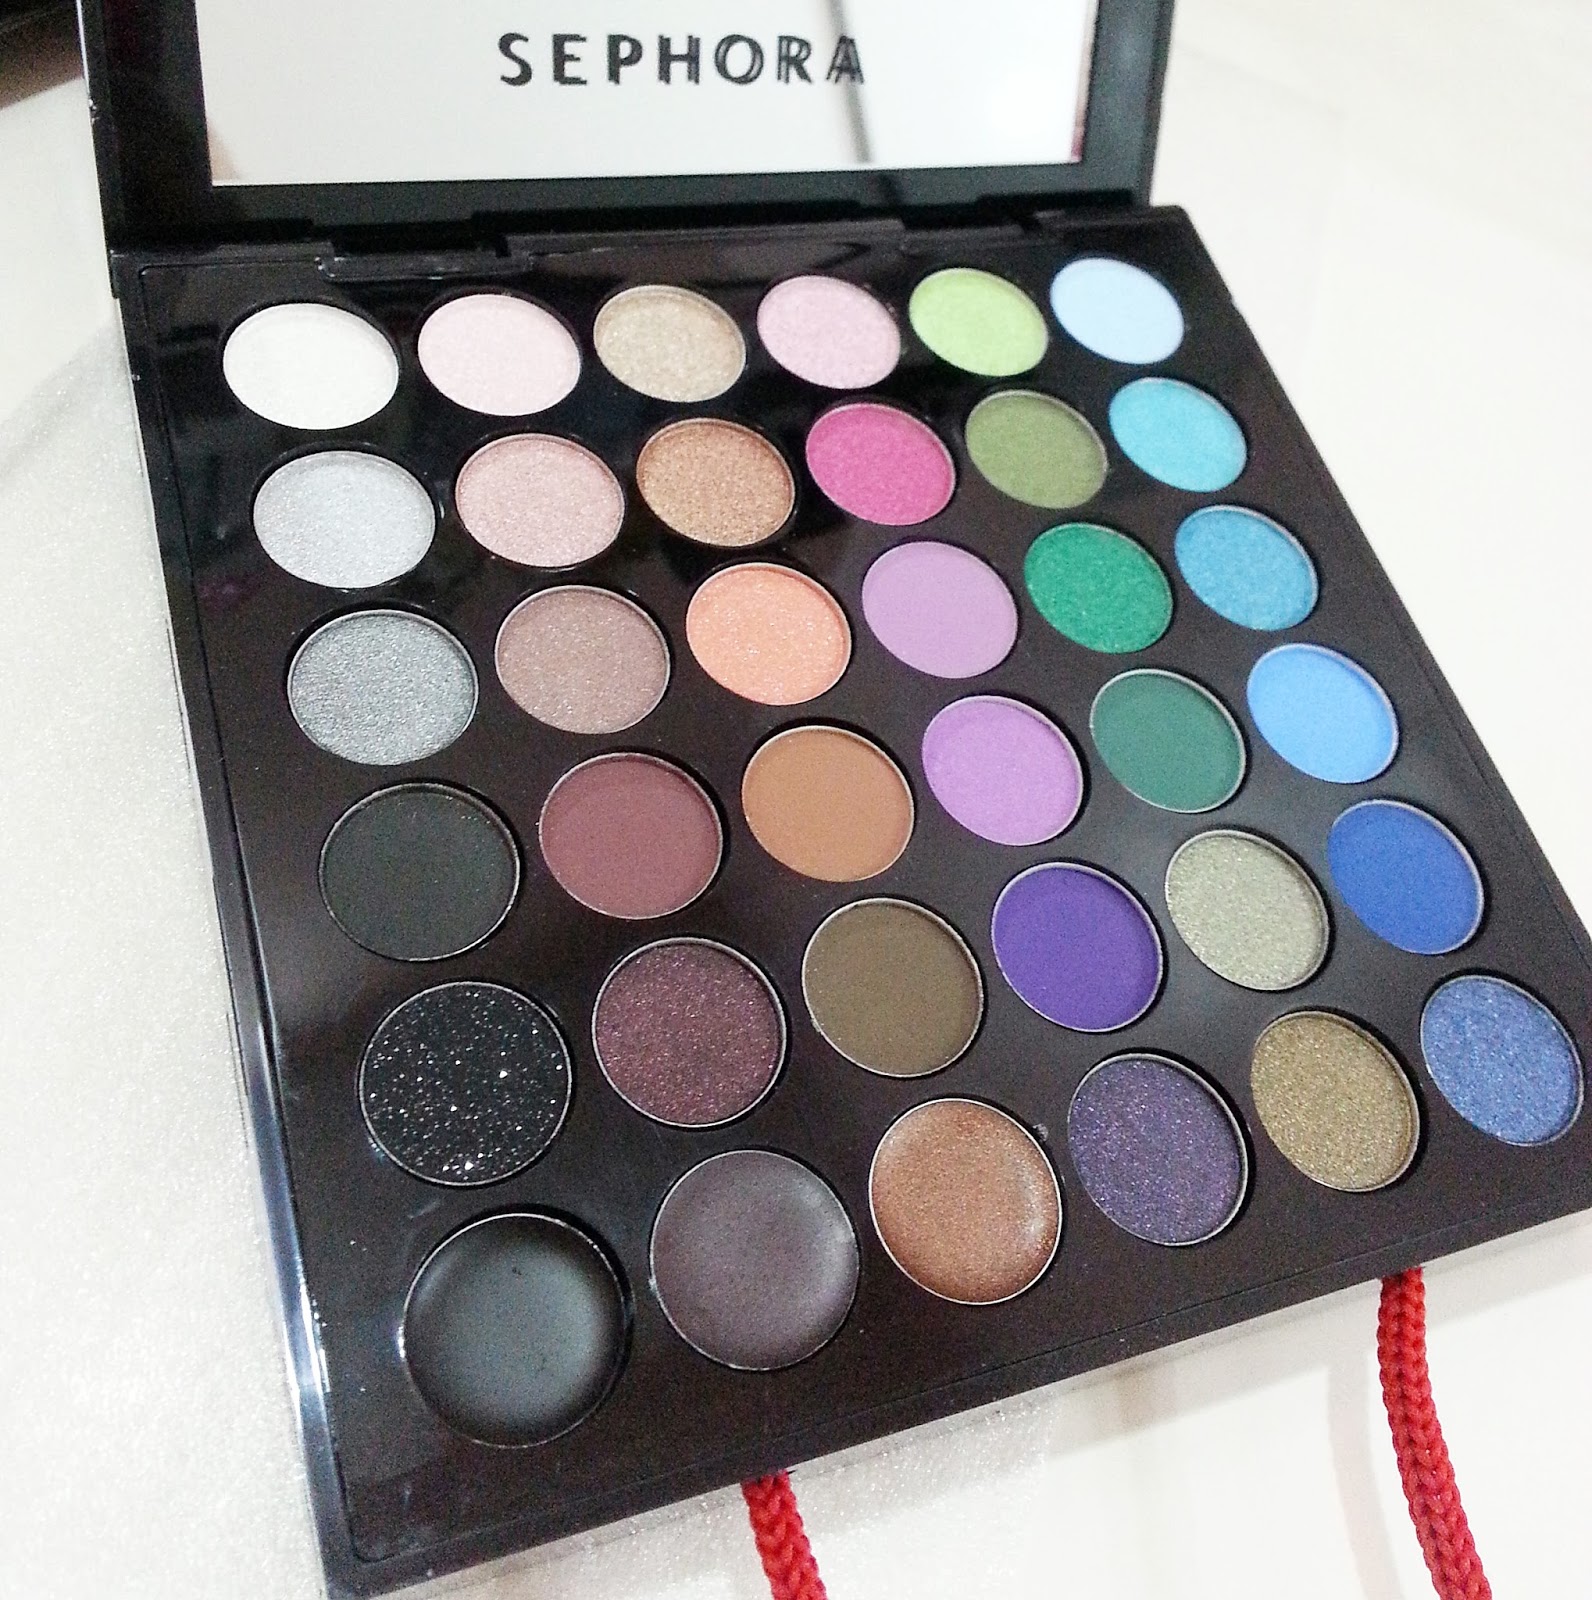 However if you look closely, for the eyeshadows palette, the... 